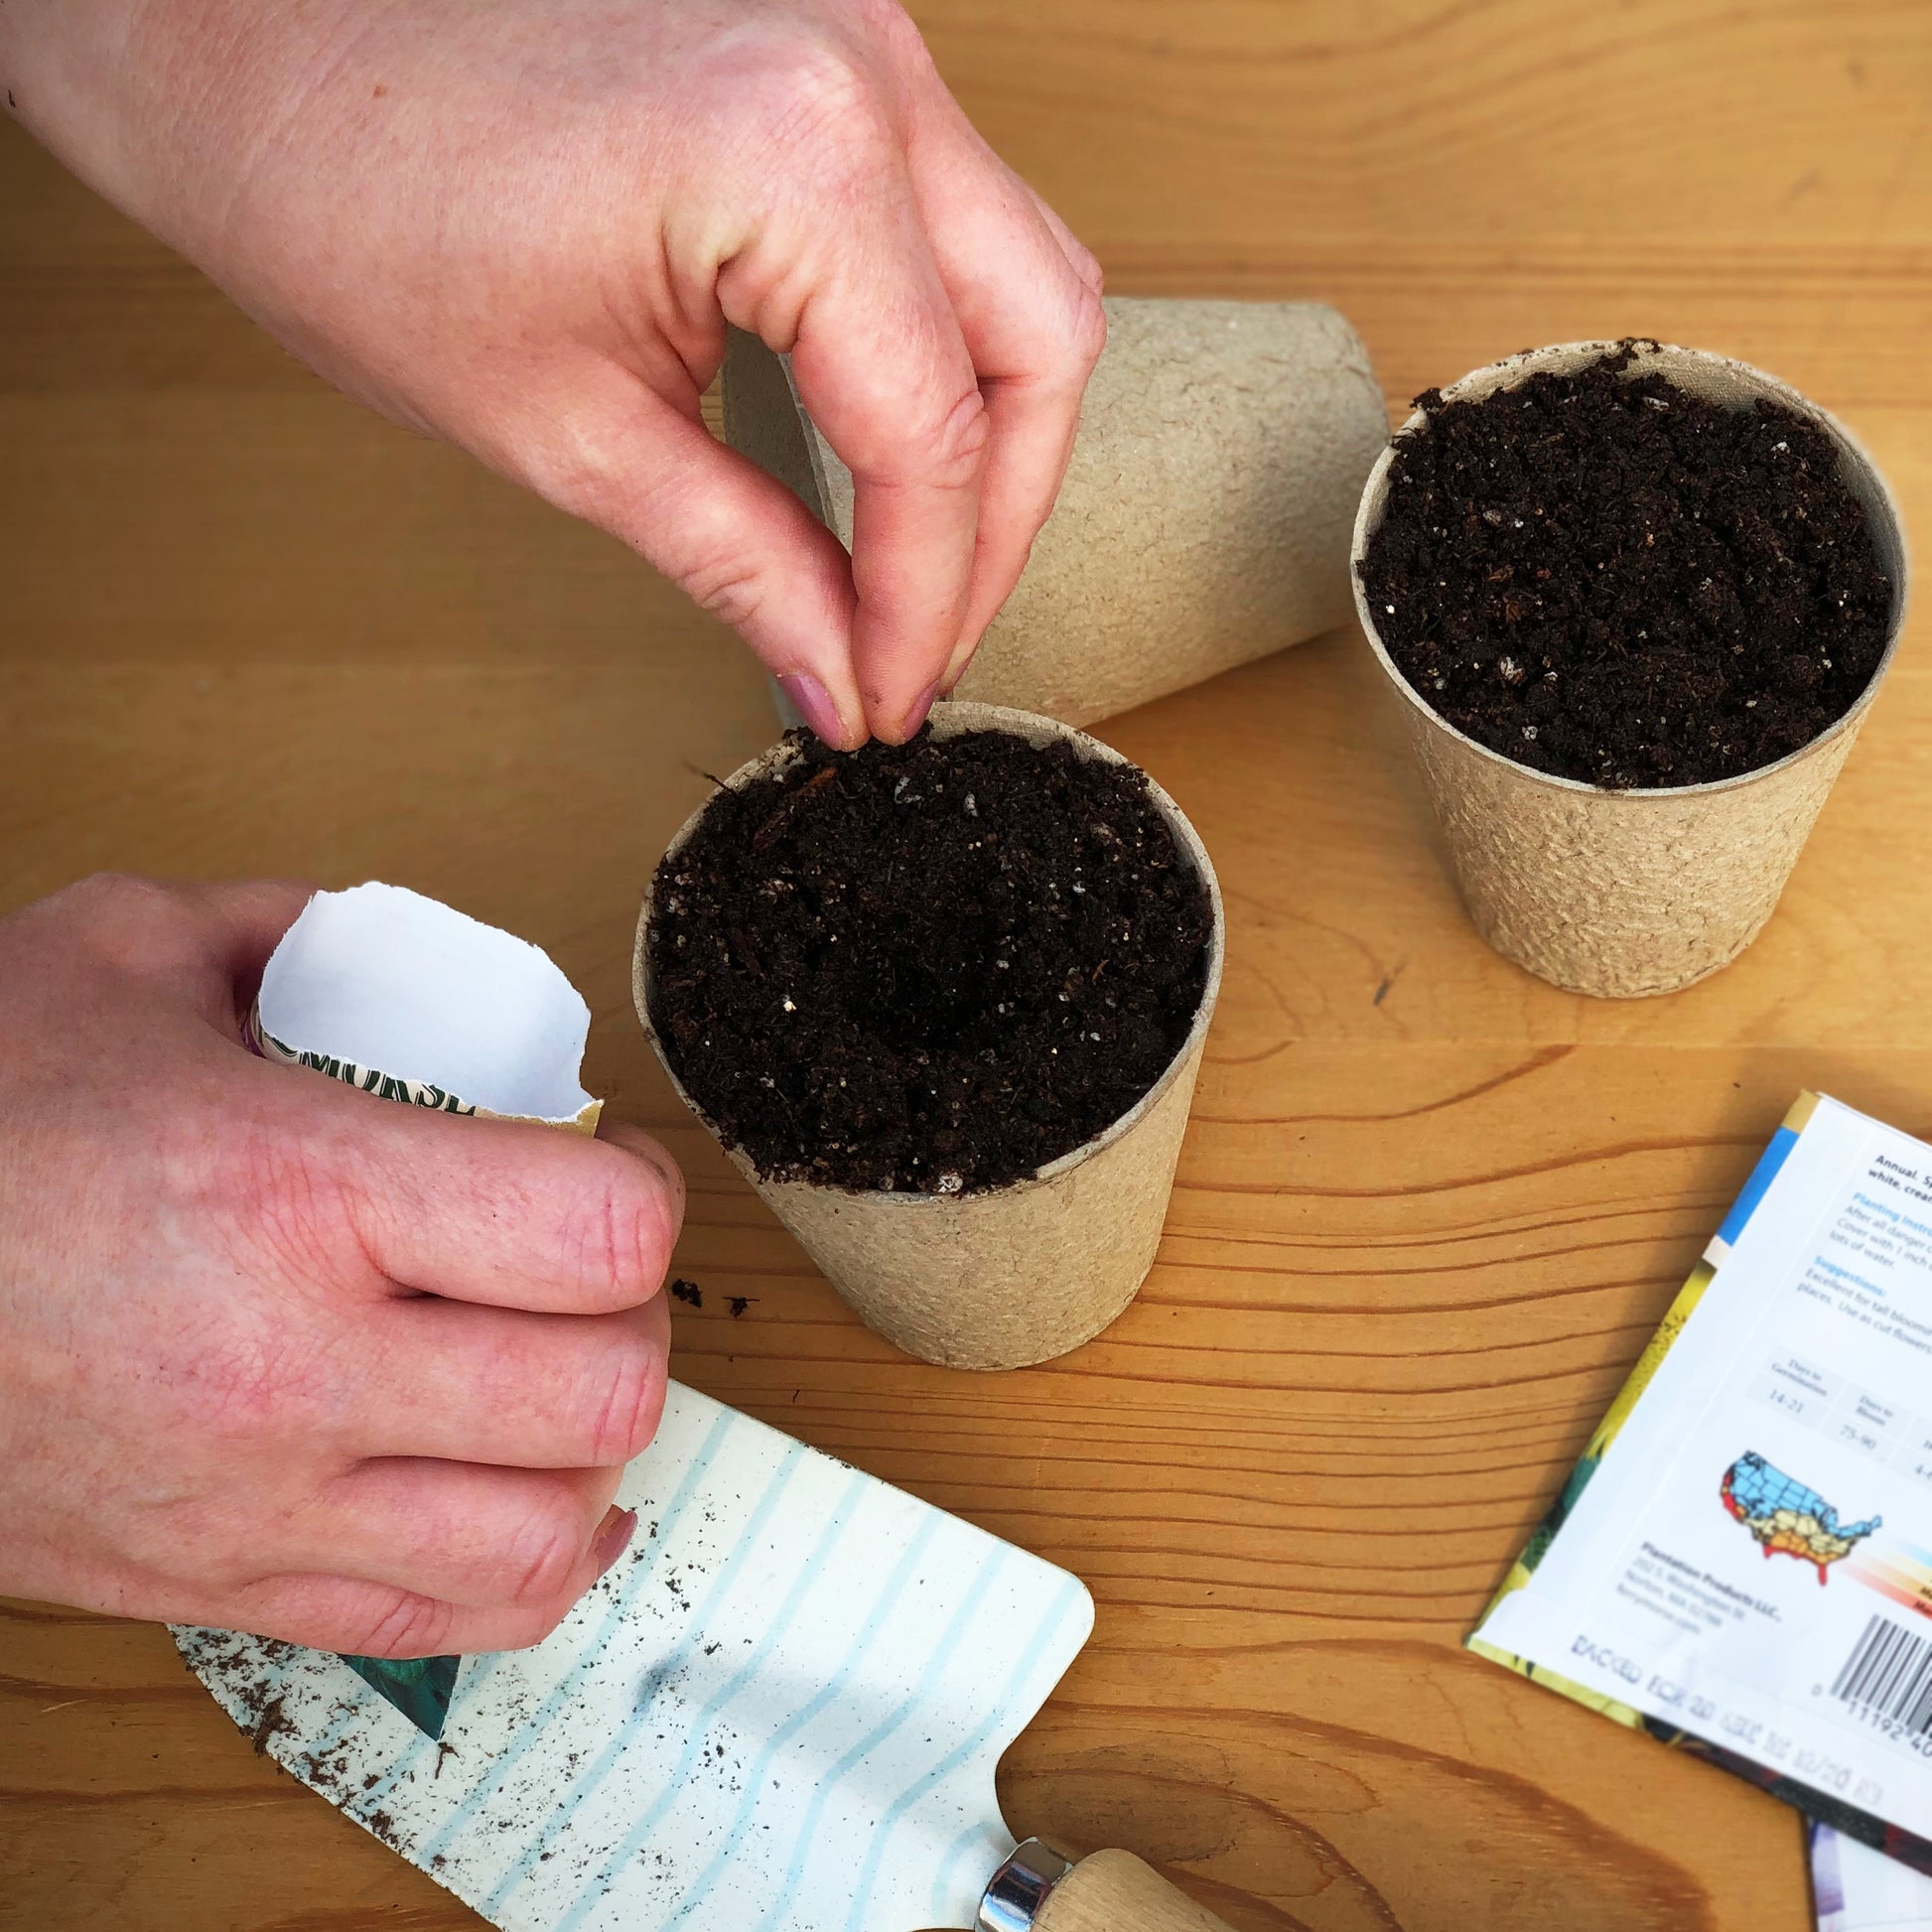 Start your Lemon Cucumbers seeds in Jiffy biodegradable peat pots which make for easy transplanting and prevent root shock.